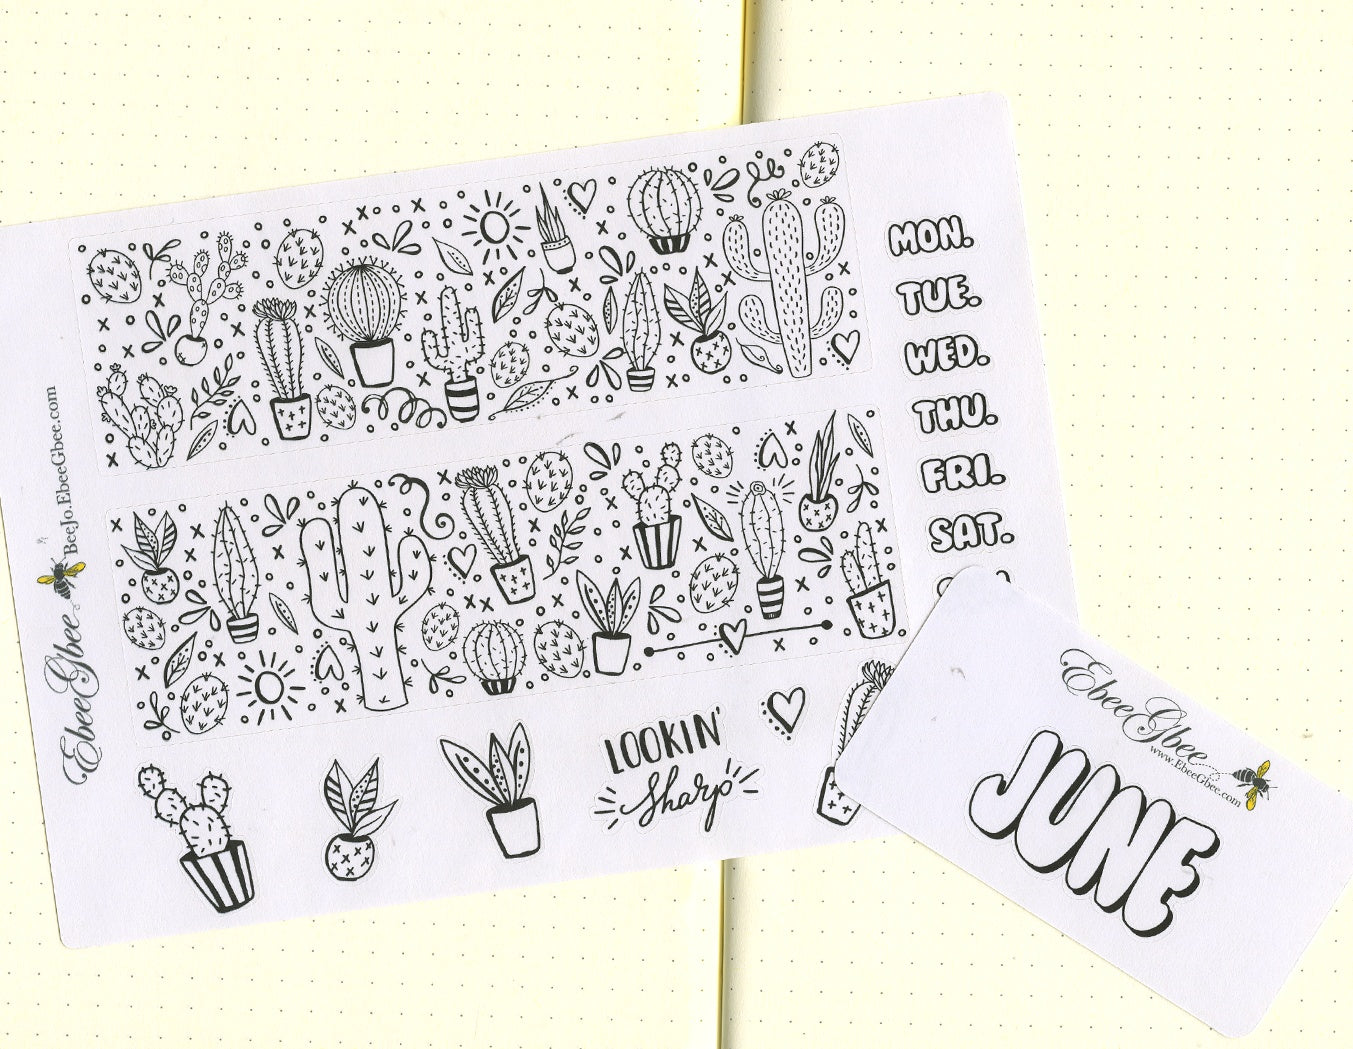 DOODLE BANNERS for Monthly or Weekly Layouts | You Pick Your Month | BUJO Style